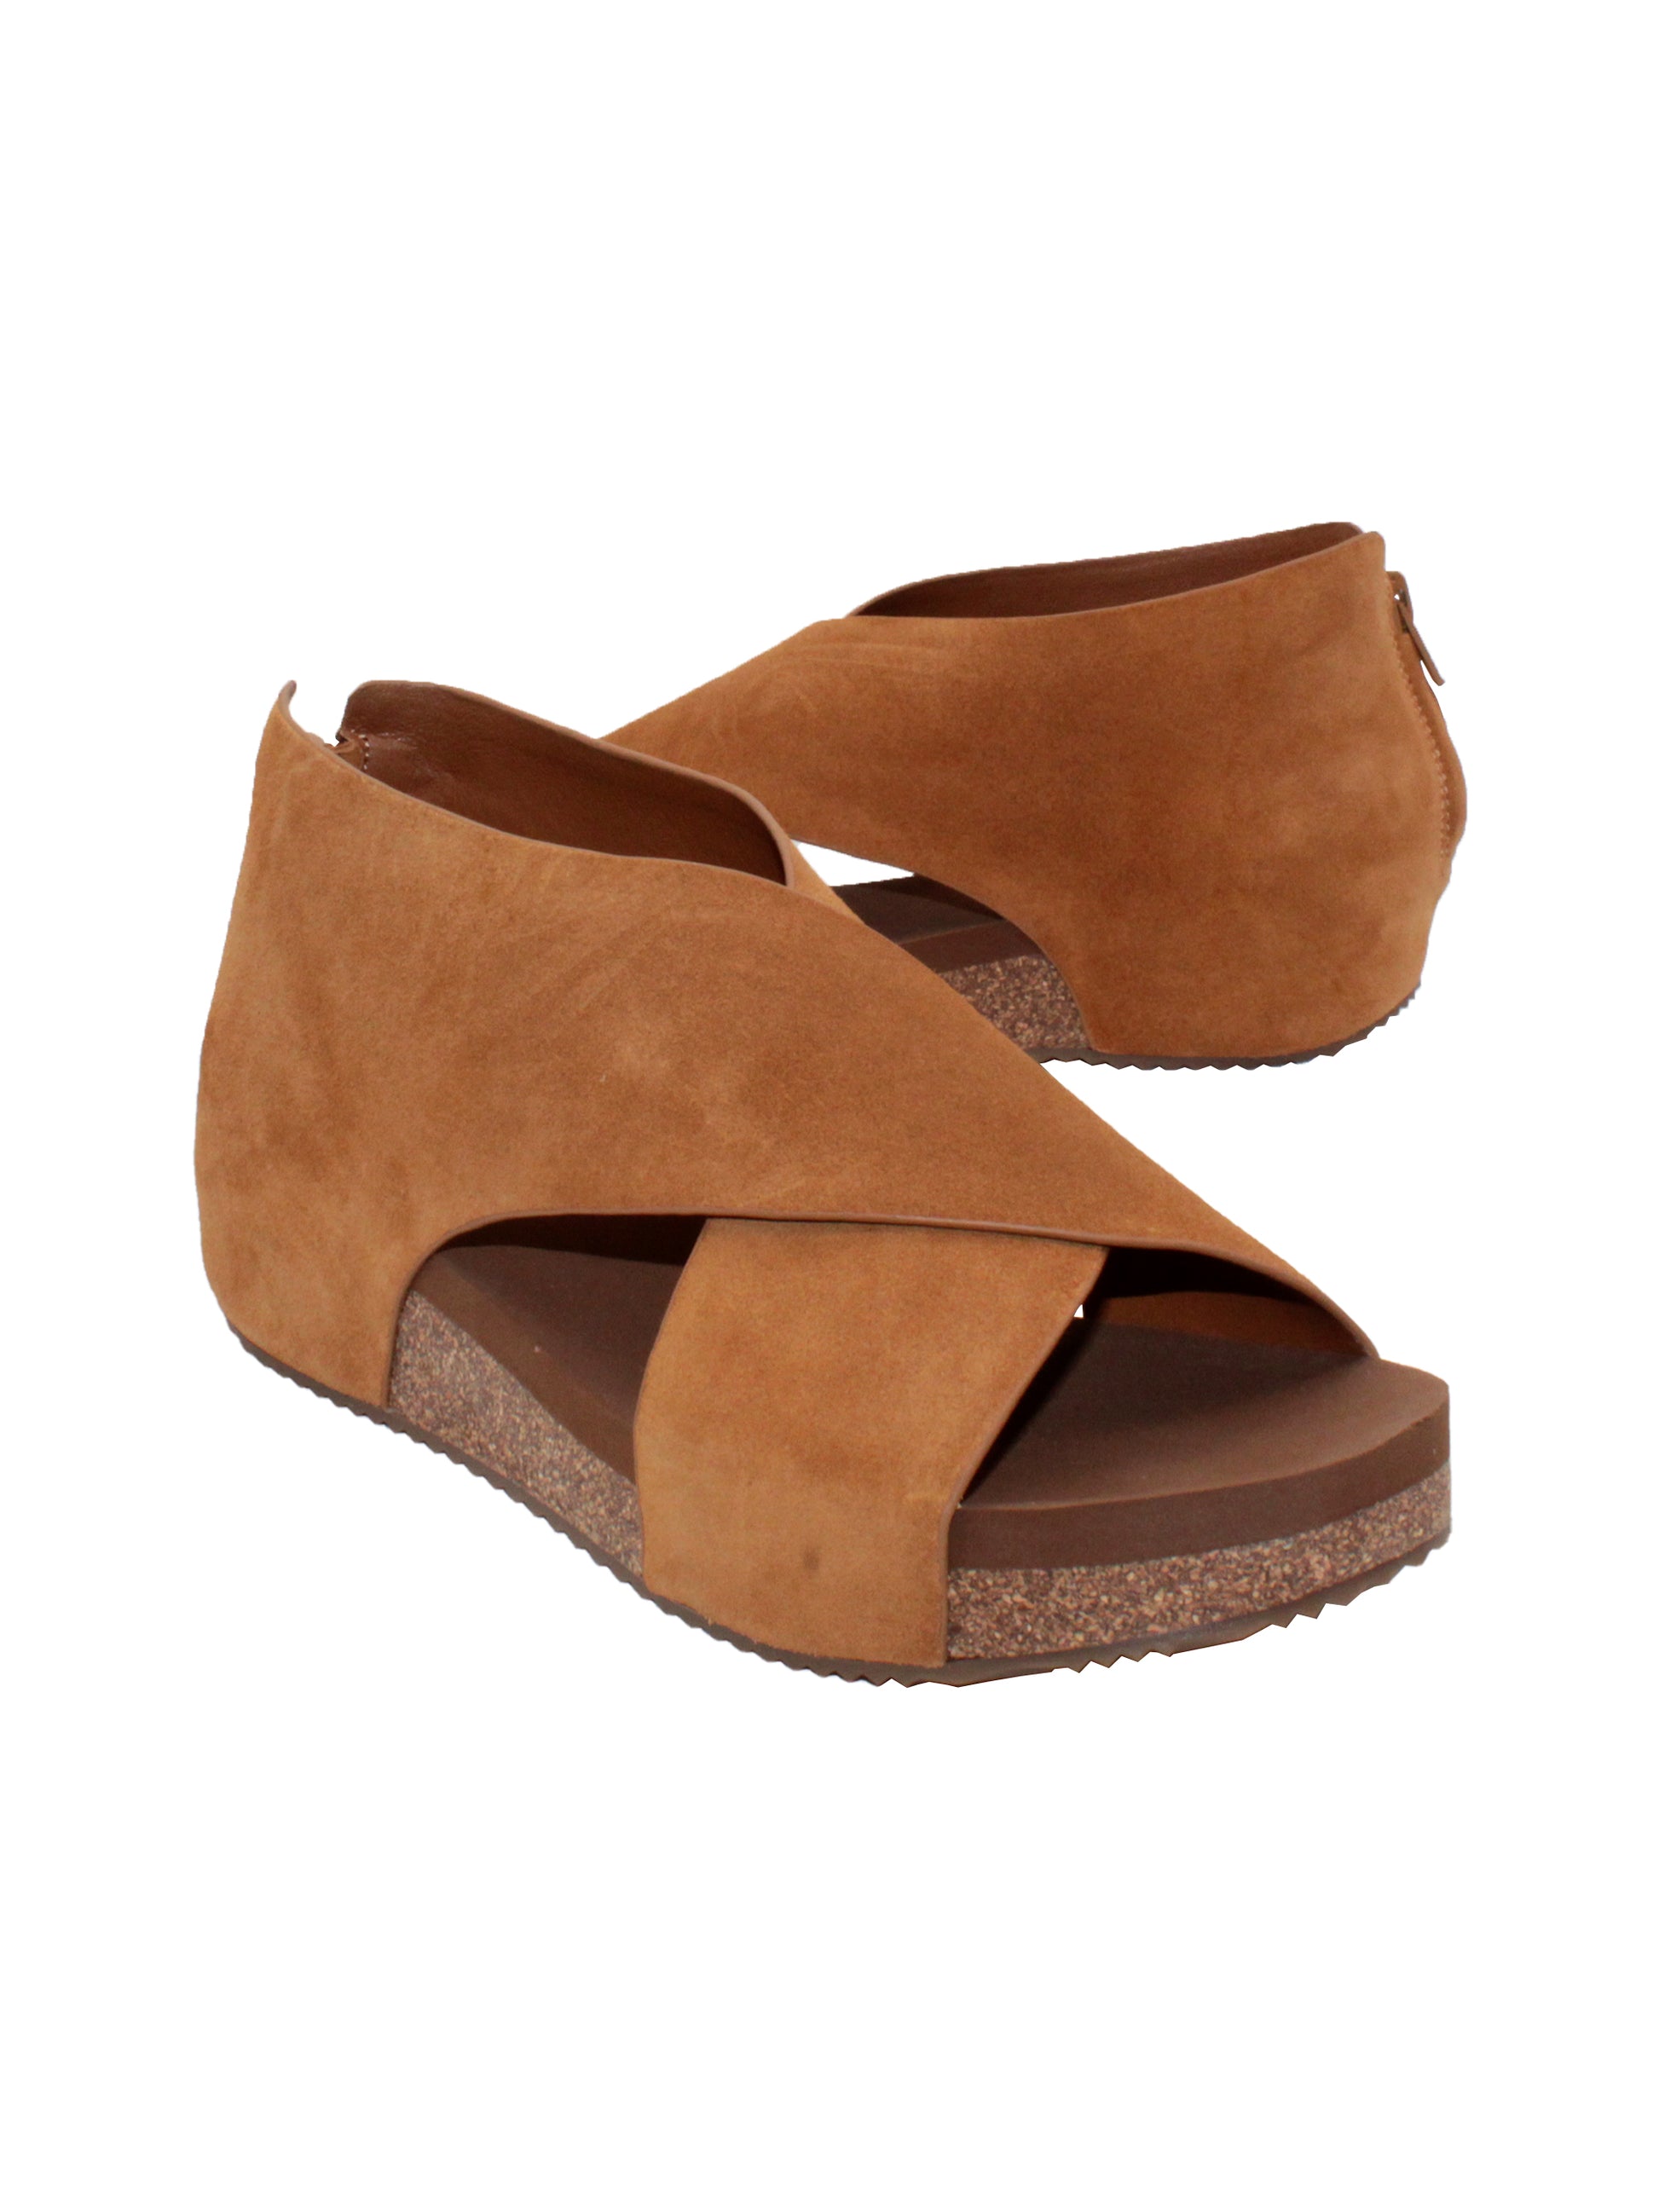 The ‘Alton’ tan sandals by Volatile are made from plush genuine suede and designed with crisscross straps that meet in the back for a closed-but-open effect suitable for year-round styling. Featuring Volatile’s signature ultra-comfort EVA insole stationed on a modest low wedge, and durable, non-skid rubber traction soles, these are ideal for all day walking.